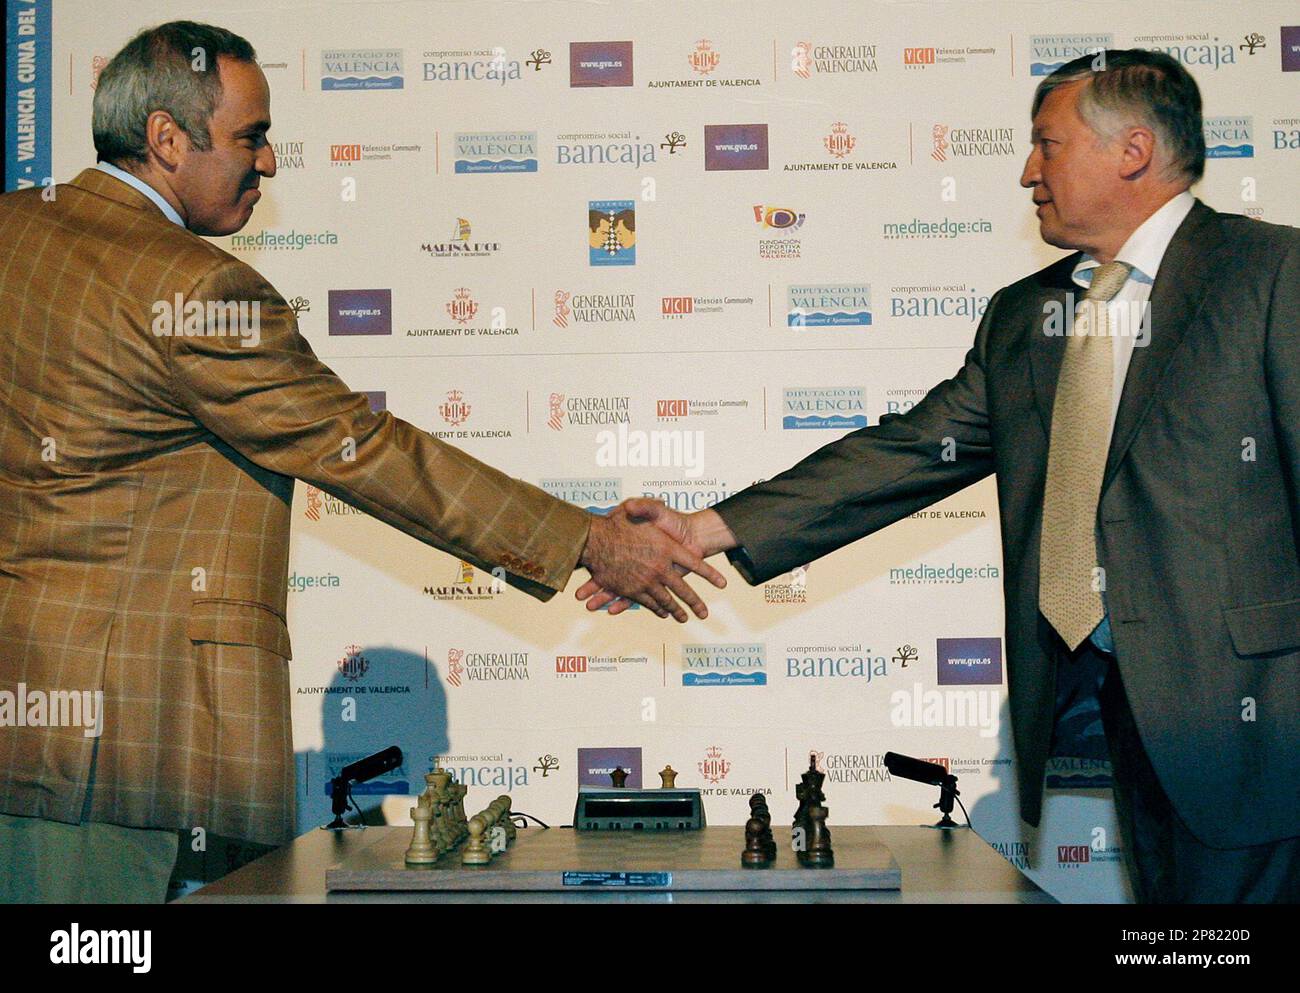 Former chess world champions Garry Kasparov, right, and Anatoly Karpov,  left, play an exhibition rematch in Valencia, Spain, Tuesday, Sept. 22,  2009. Chess eminences Kasparov and Karpov are dusting off their knights